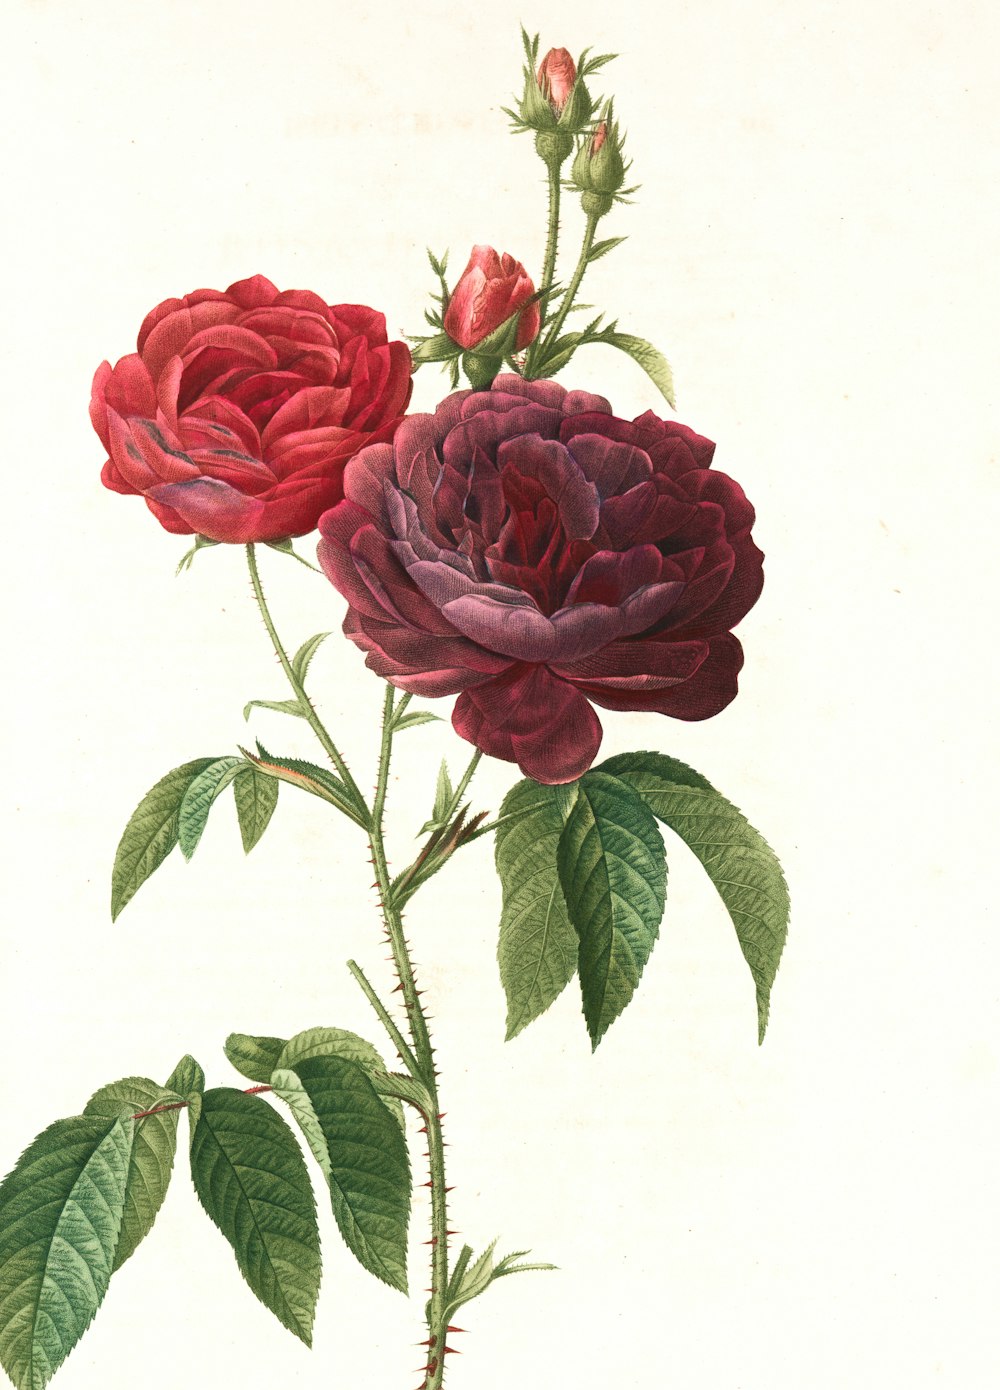 pink roses with green leaves